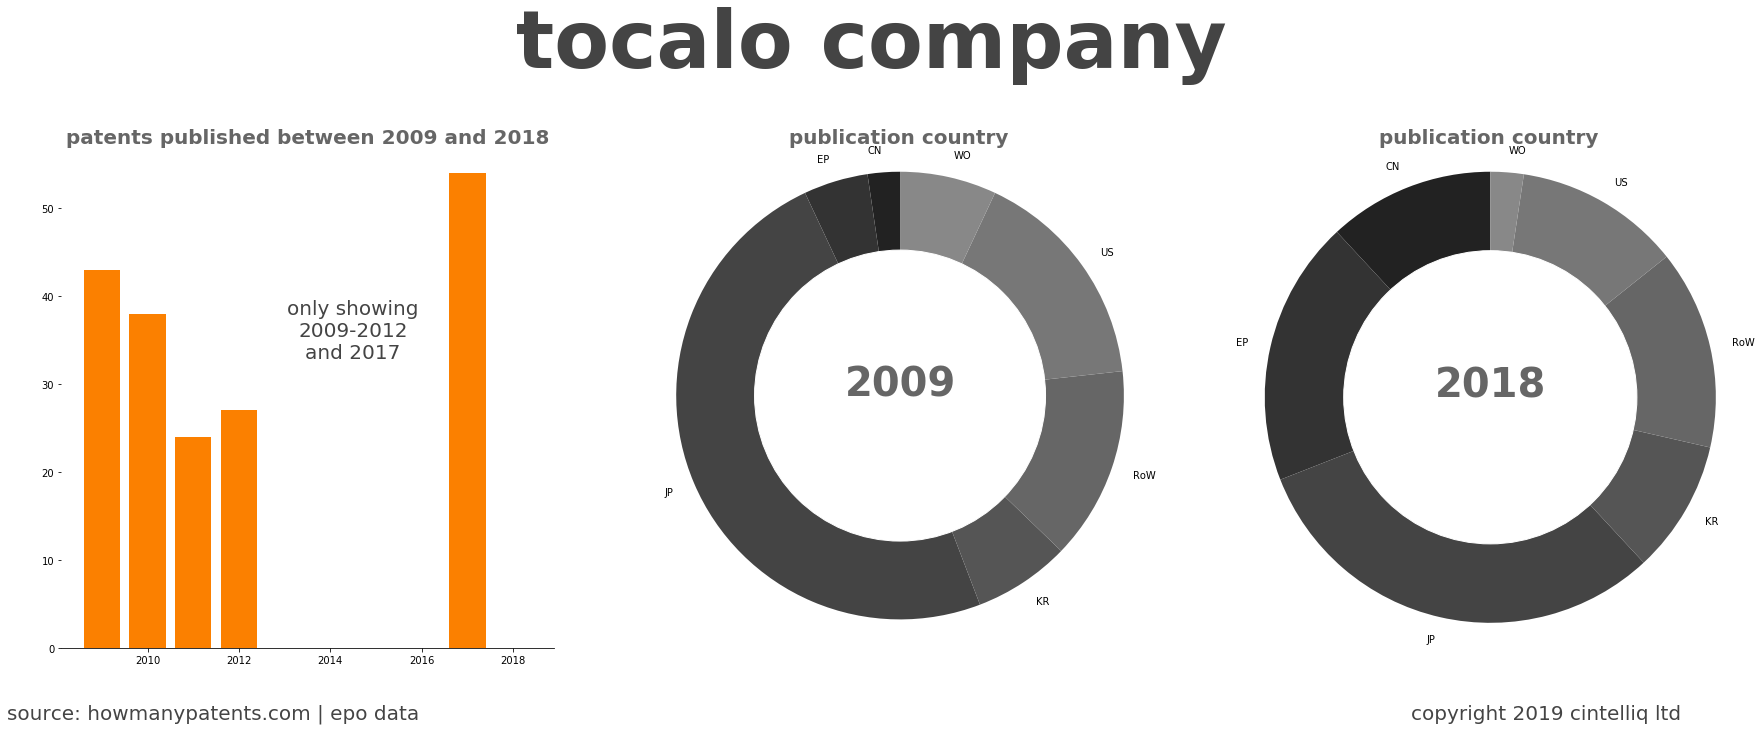 summary of patents for Tocalo Company